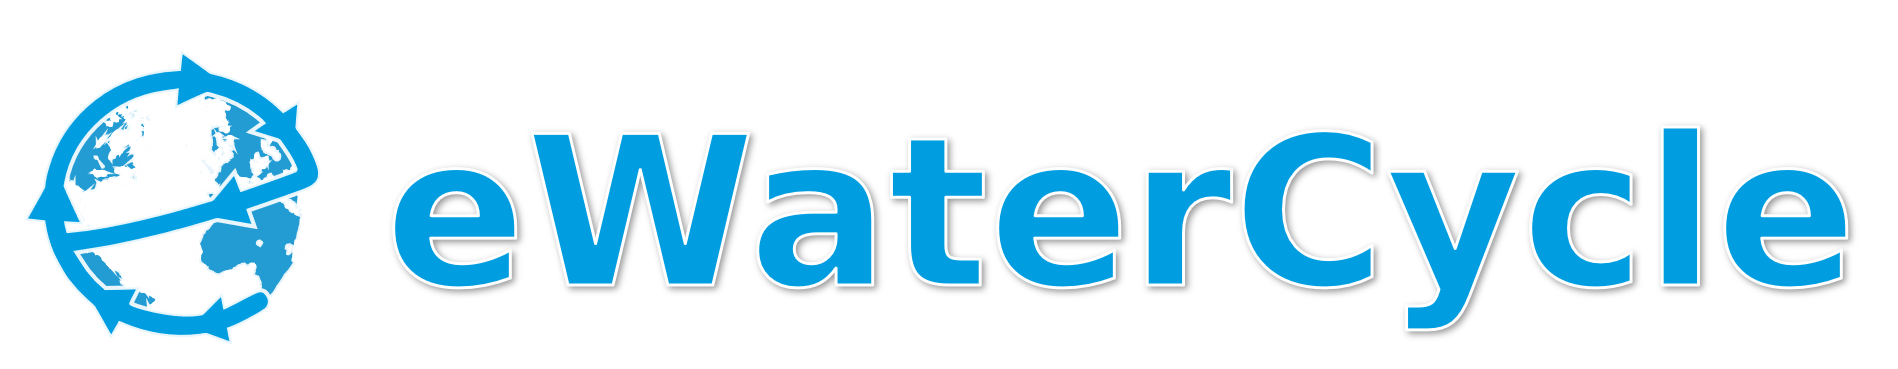 Logo for ewatercycle